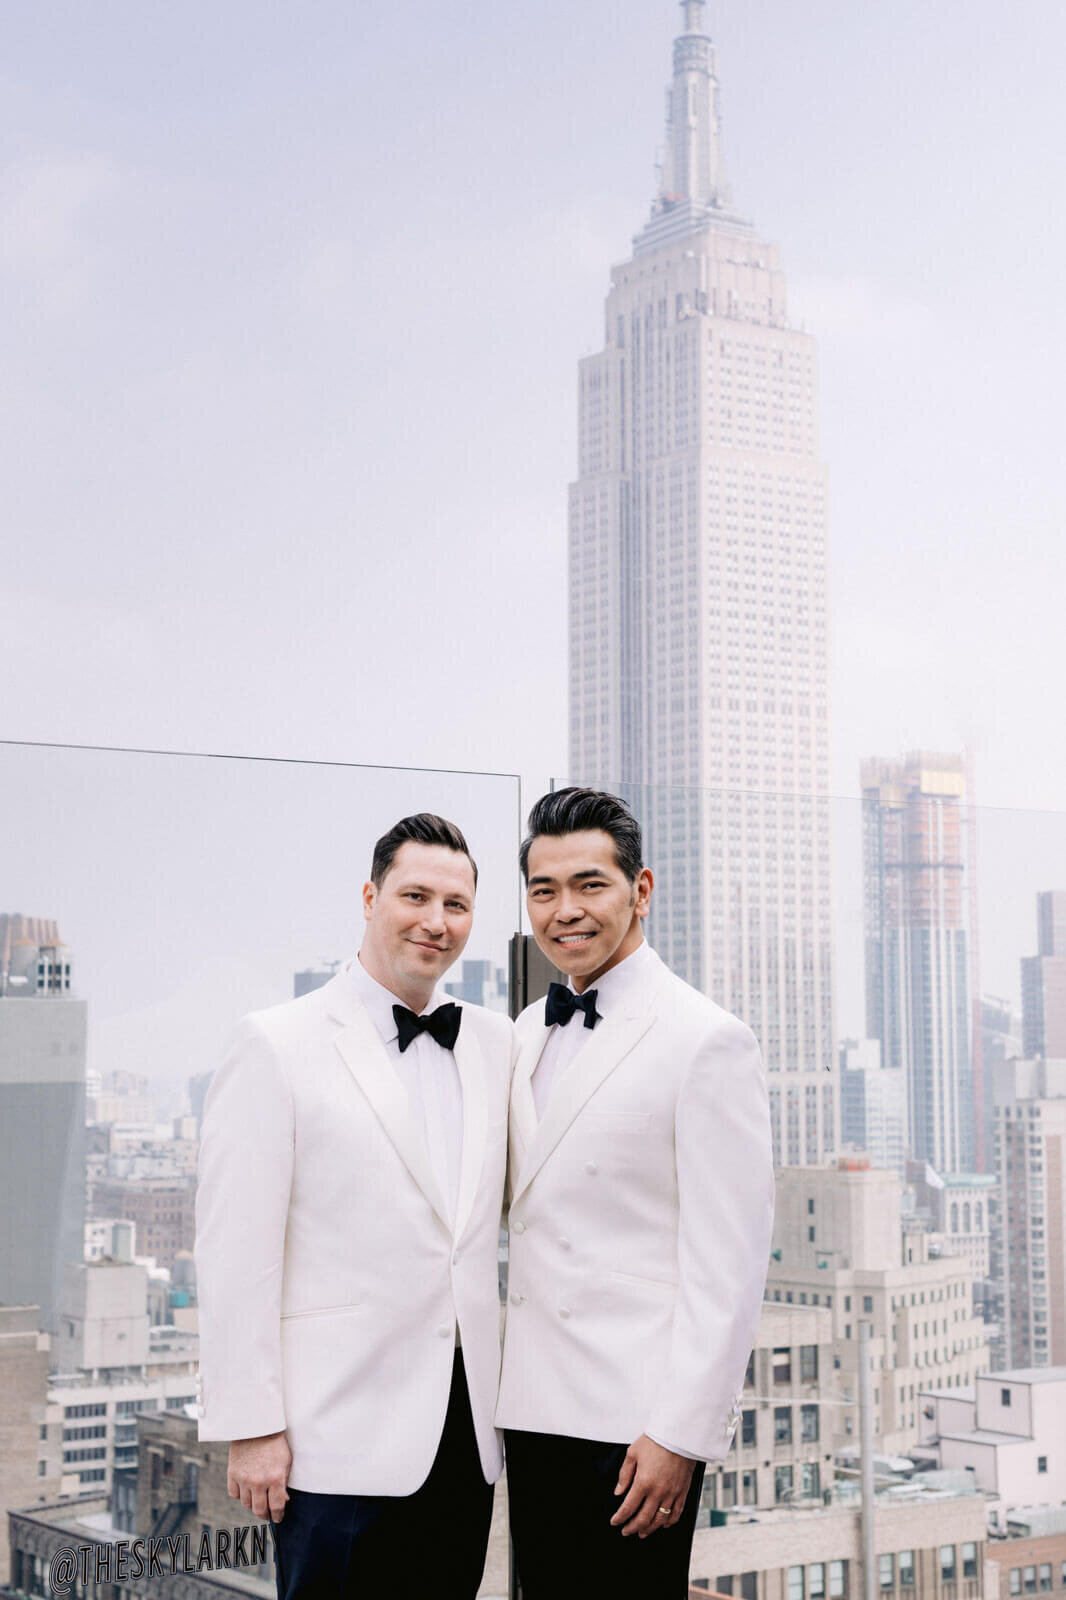 Two grooms are smiling, with buildings in the background, in The Skylark, New York. Wedding Image by Jenny Fu Studio